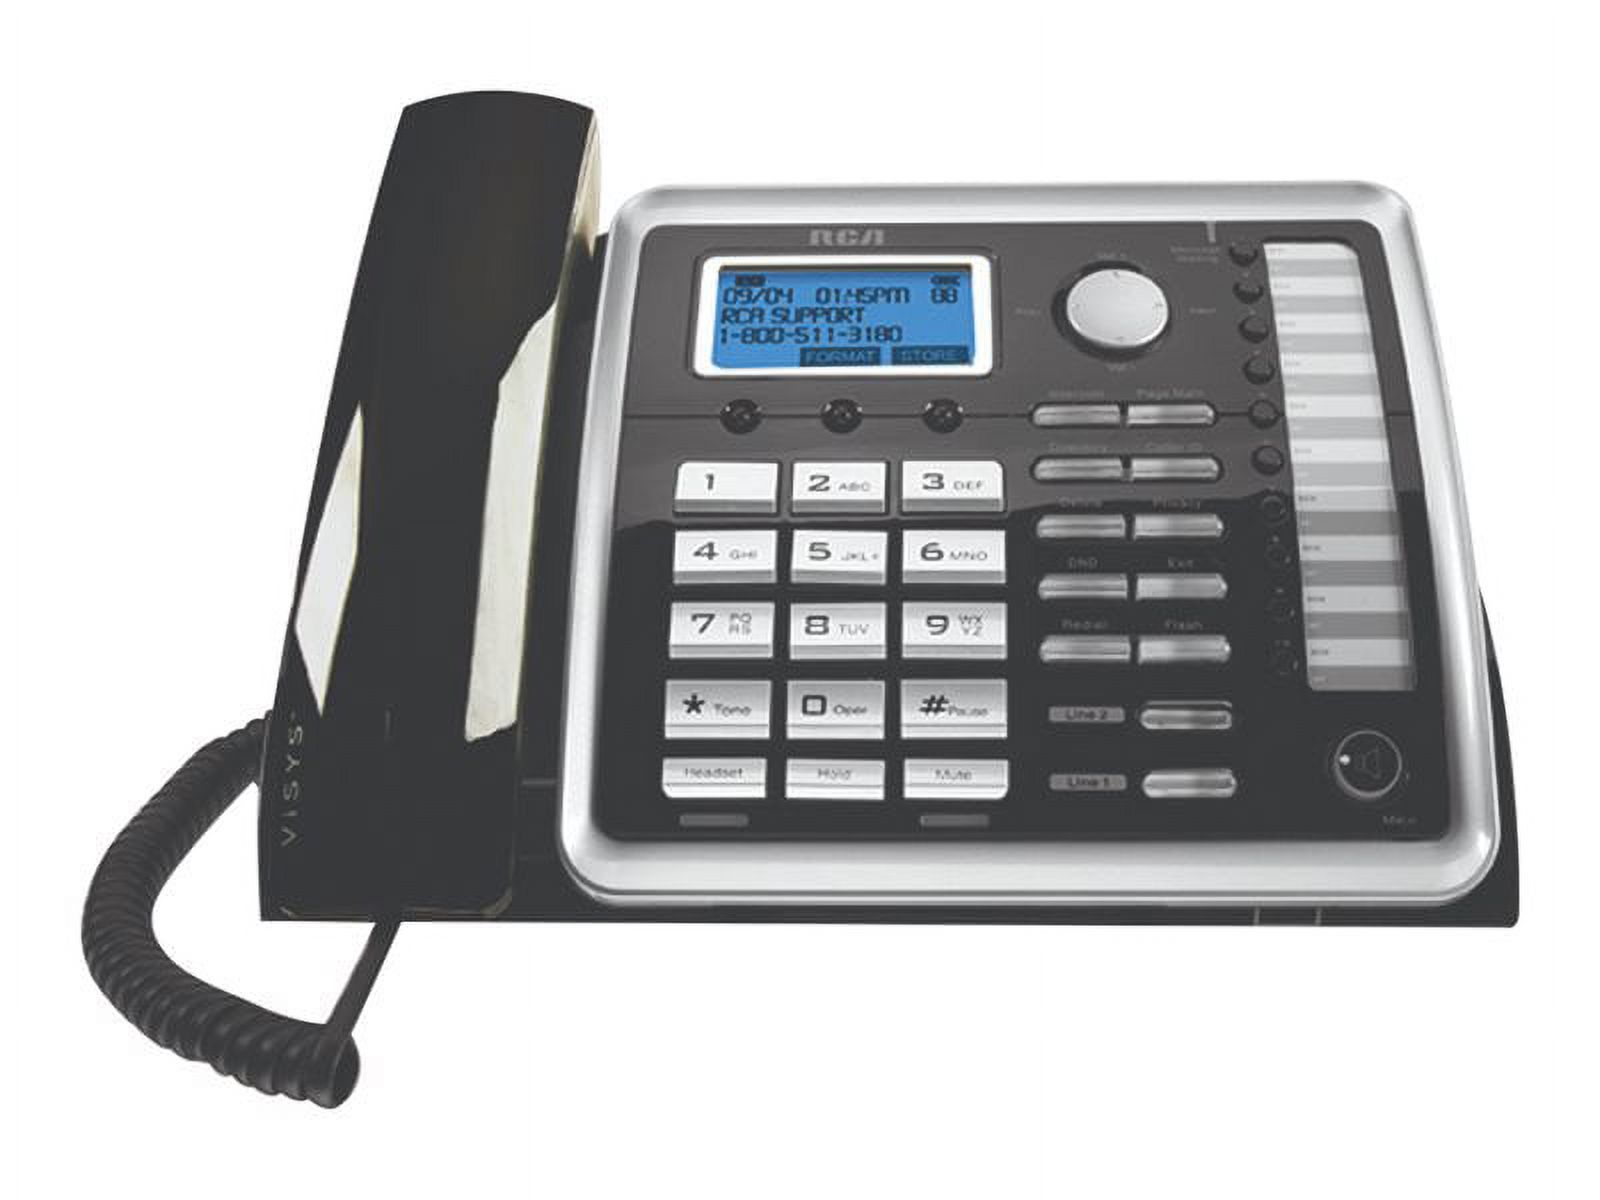 RCA ViSYS 25216 - Cordless phone with caller ID/call waiting - DECT 6.0 - 2-line operation - black, silver - image 1 of 3